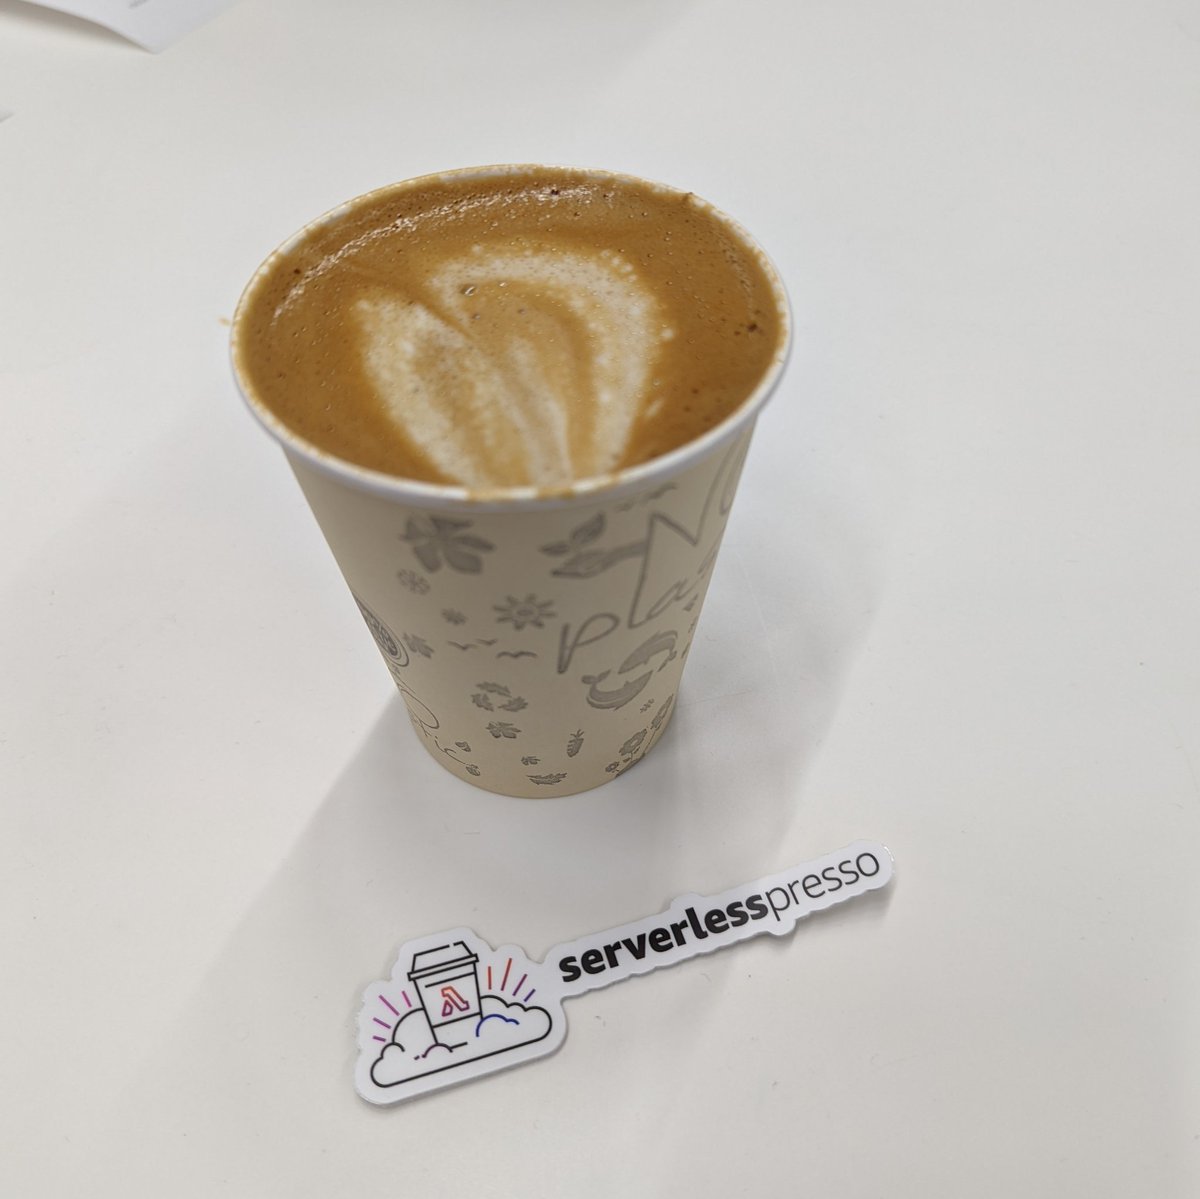 How cool is it that my coffee order was processed by a #serverlesspresso system and I can study the architecture while I wait! #AWSSummit